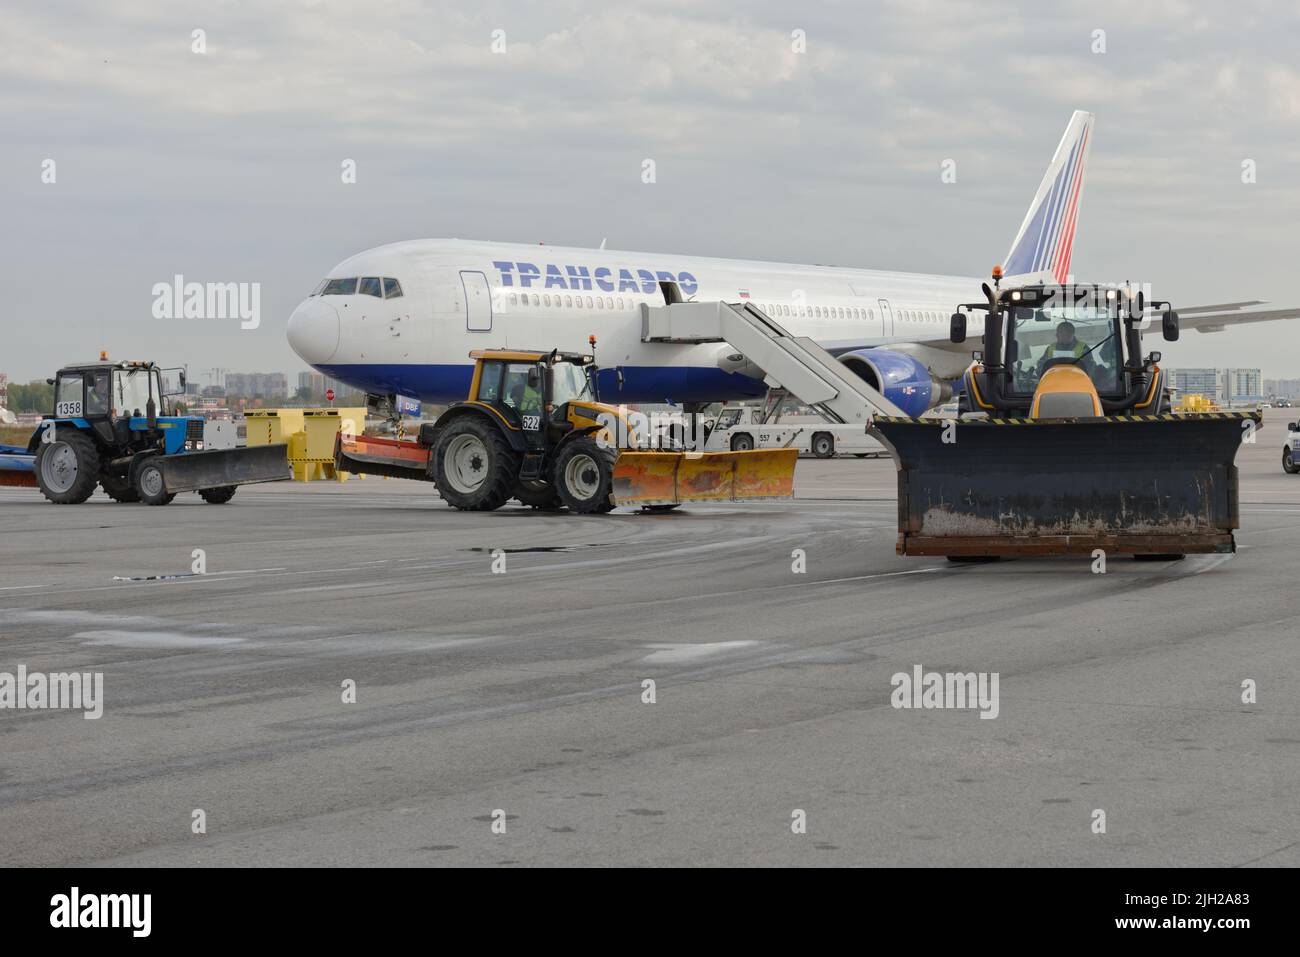 St. Petersburg, Russia - September 24, 2015: Snow removal vehicles during the annual review of equipment in the Pulkovo airport Stock Photo